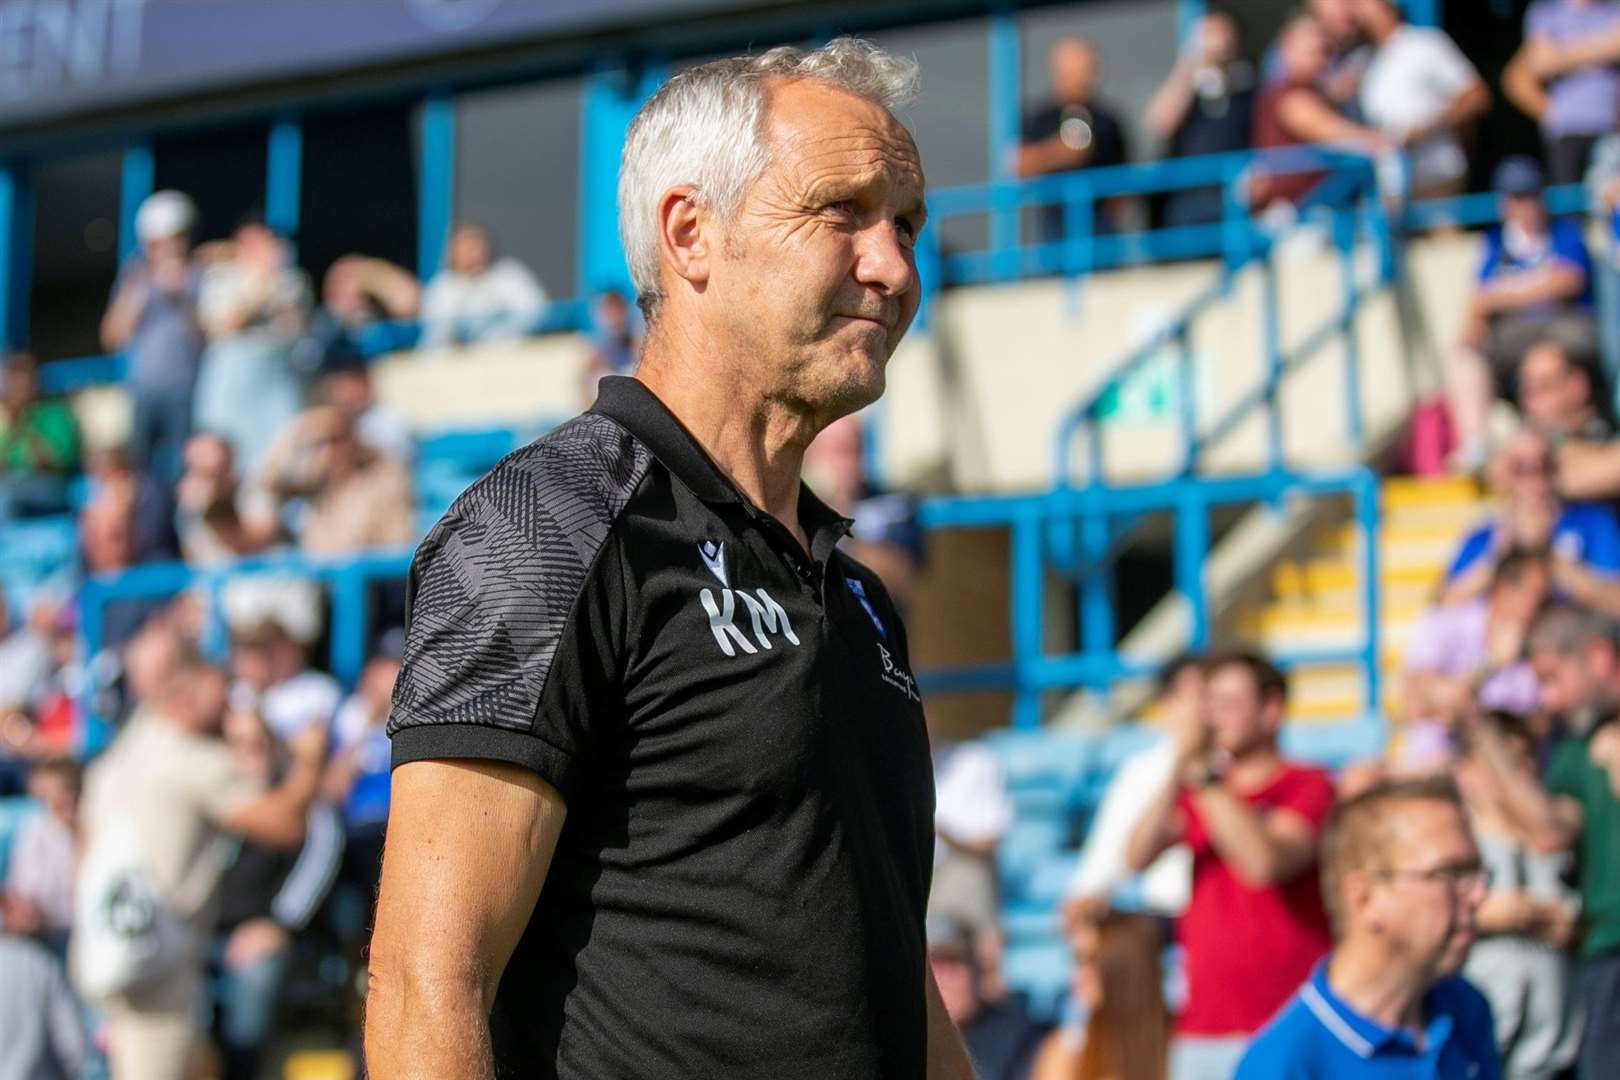 Keith Millen keeping Gillingham on track as interim manager says chairman  Brad Galinson | He takes charge again this Saturday in League 2 match at  Walsall